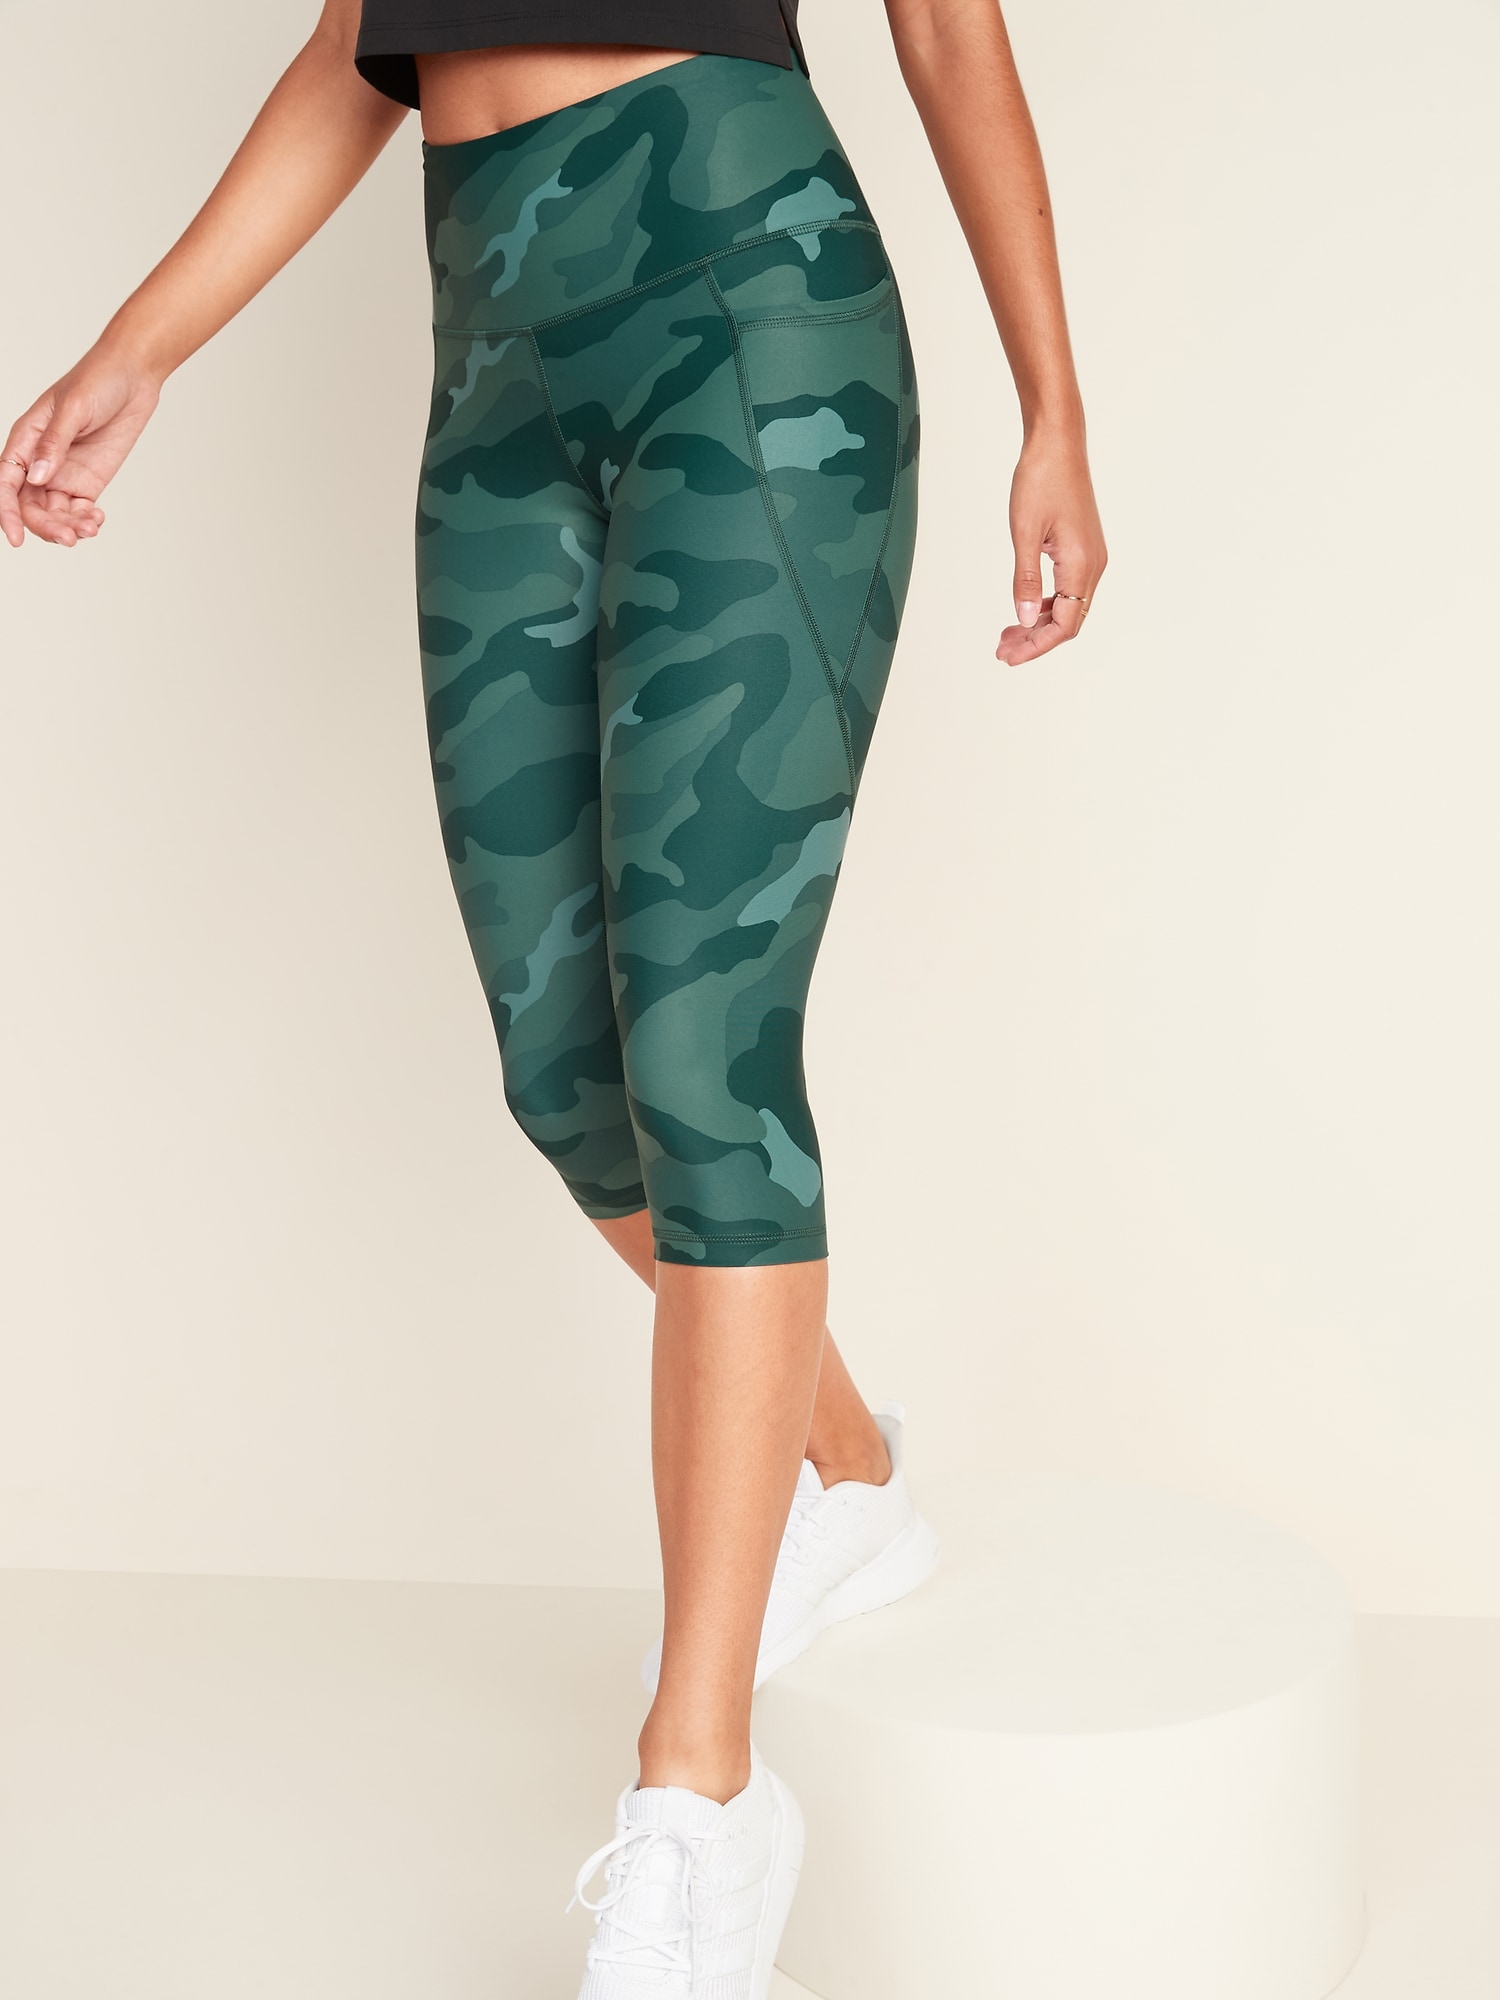 NWT: Old Navy High-Waisted Elevate Crop Leggings, Pink Camo Wave